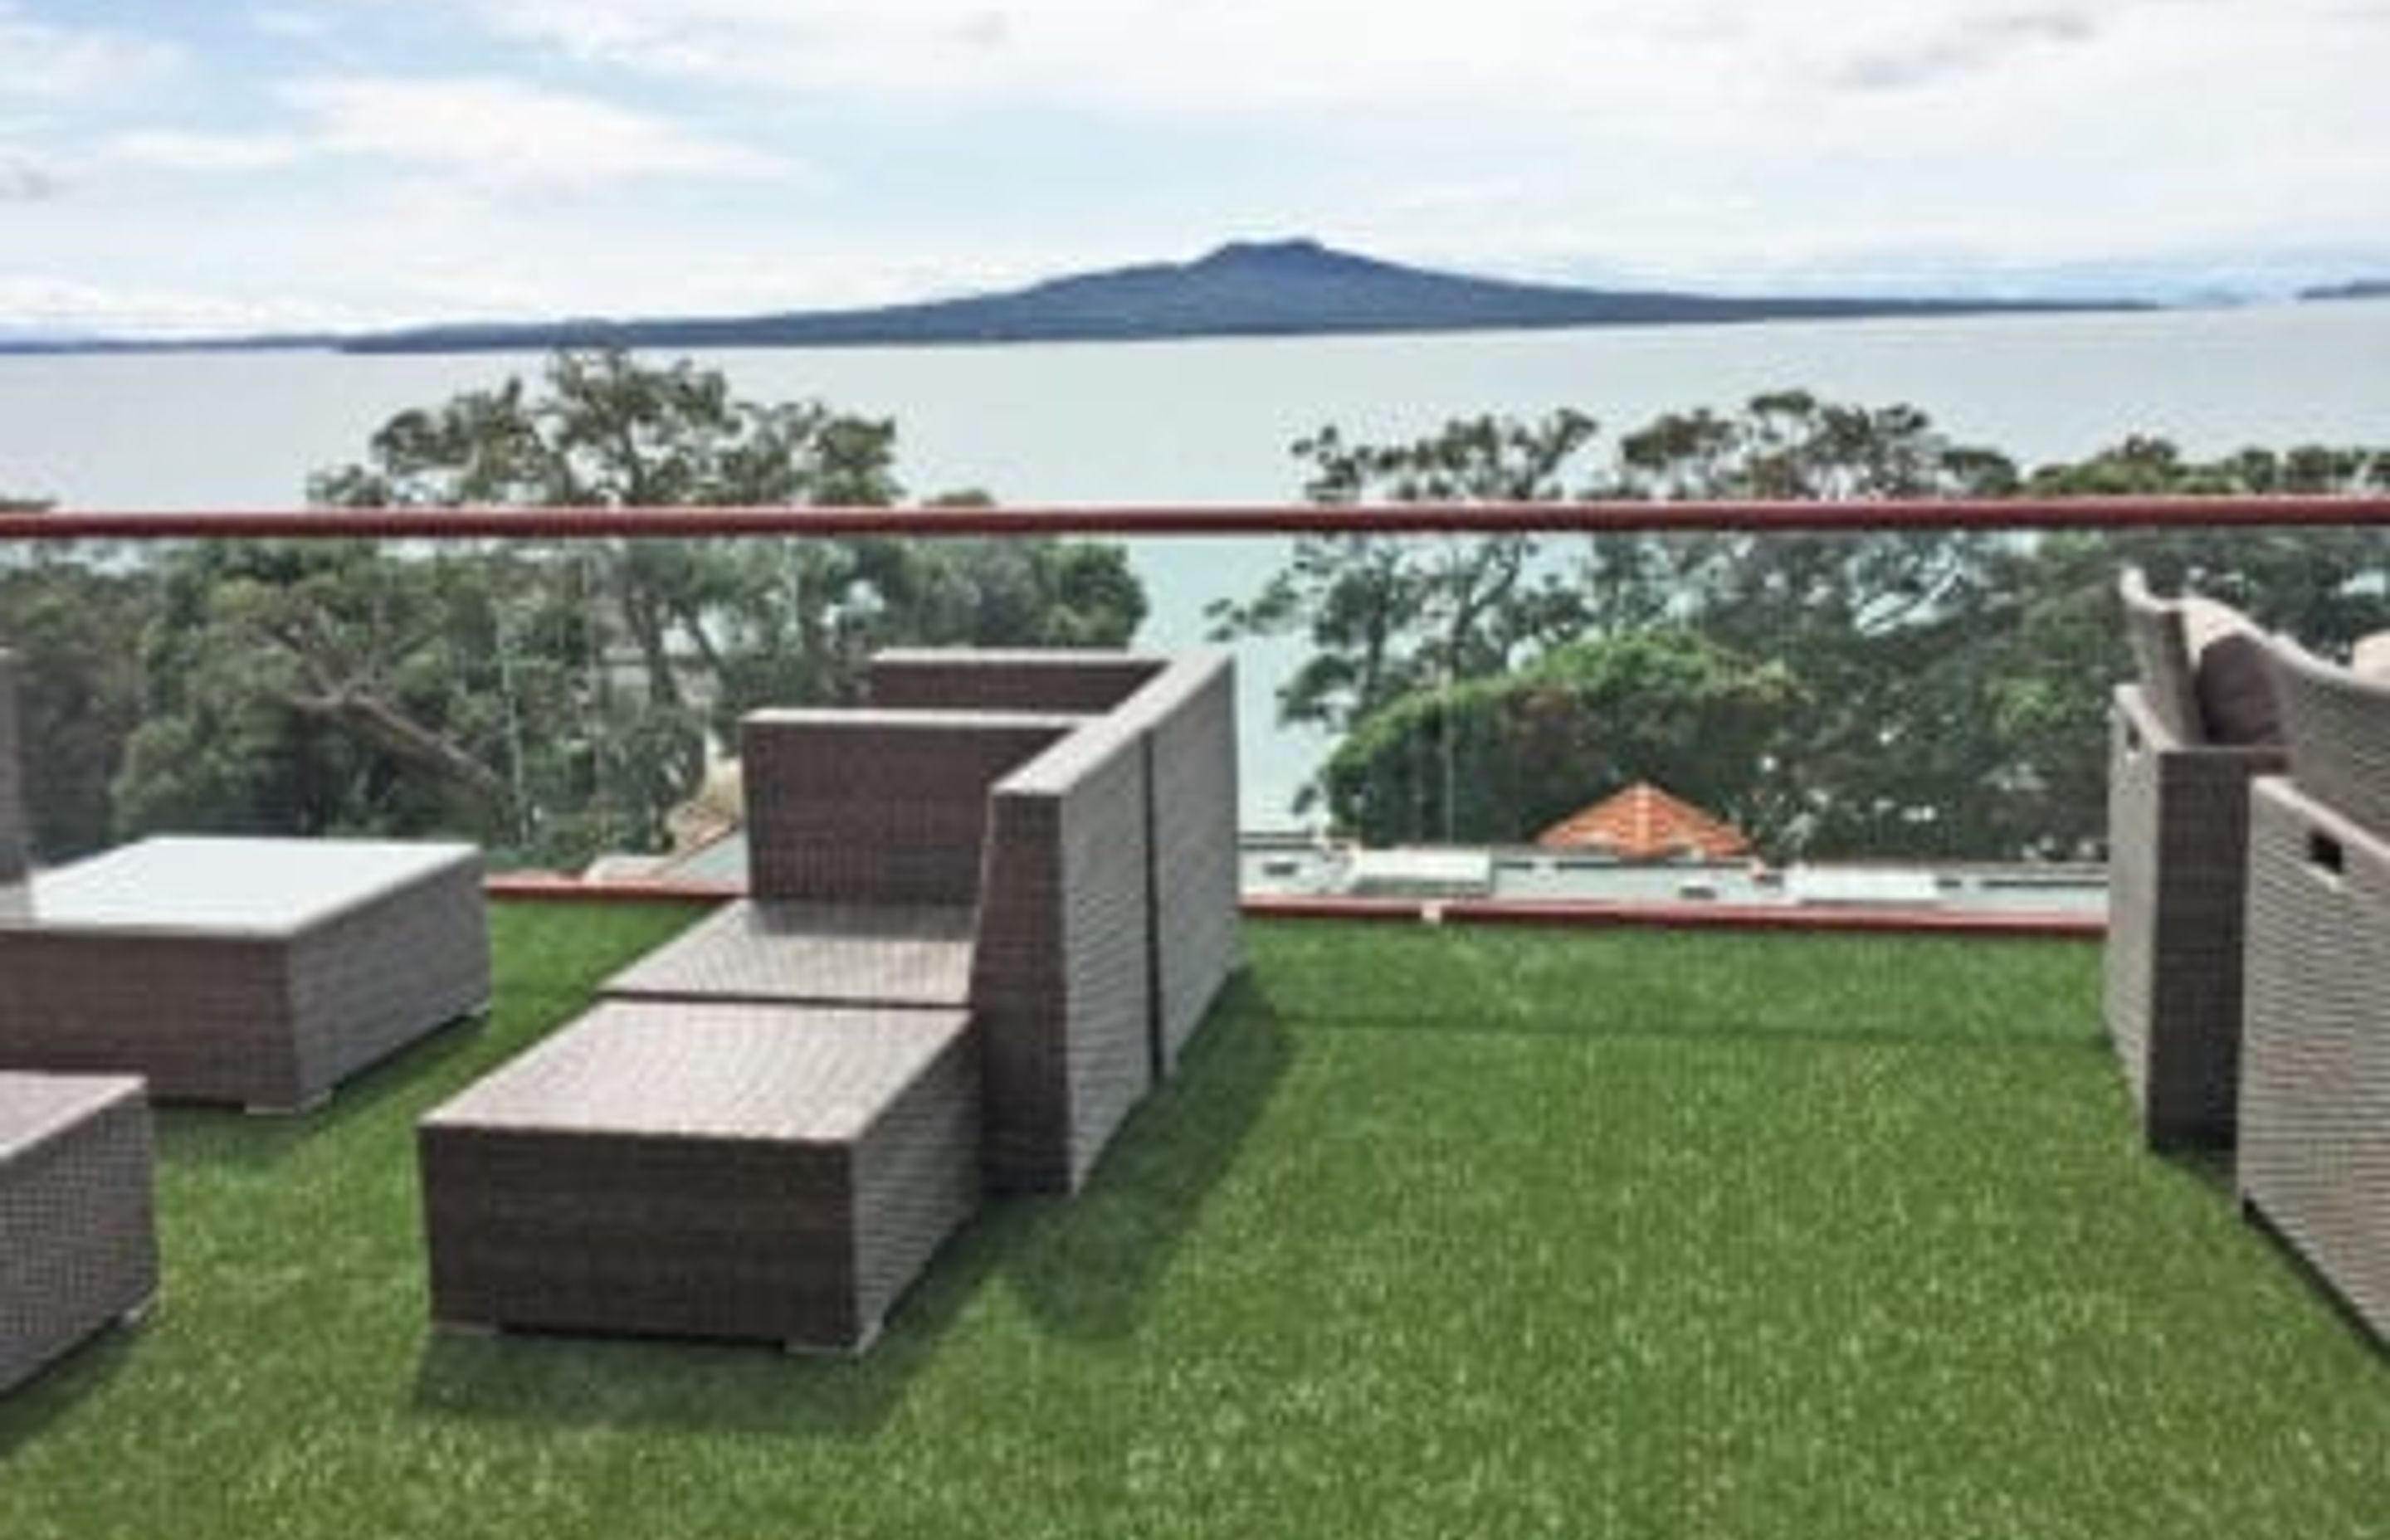 Commercial Grade Synthetic Turf: Designer’s Guide to the Perfect Rooftop Recreation Area